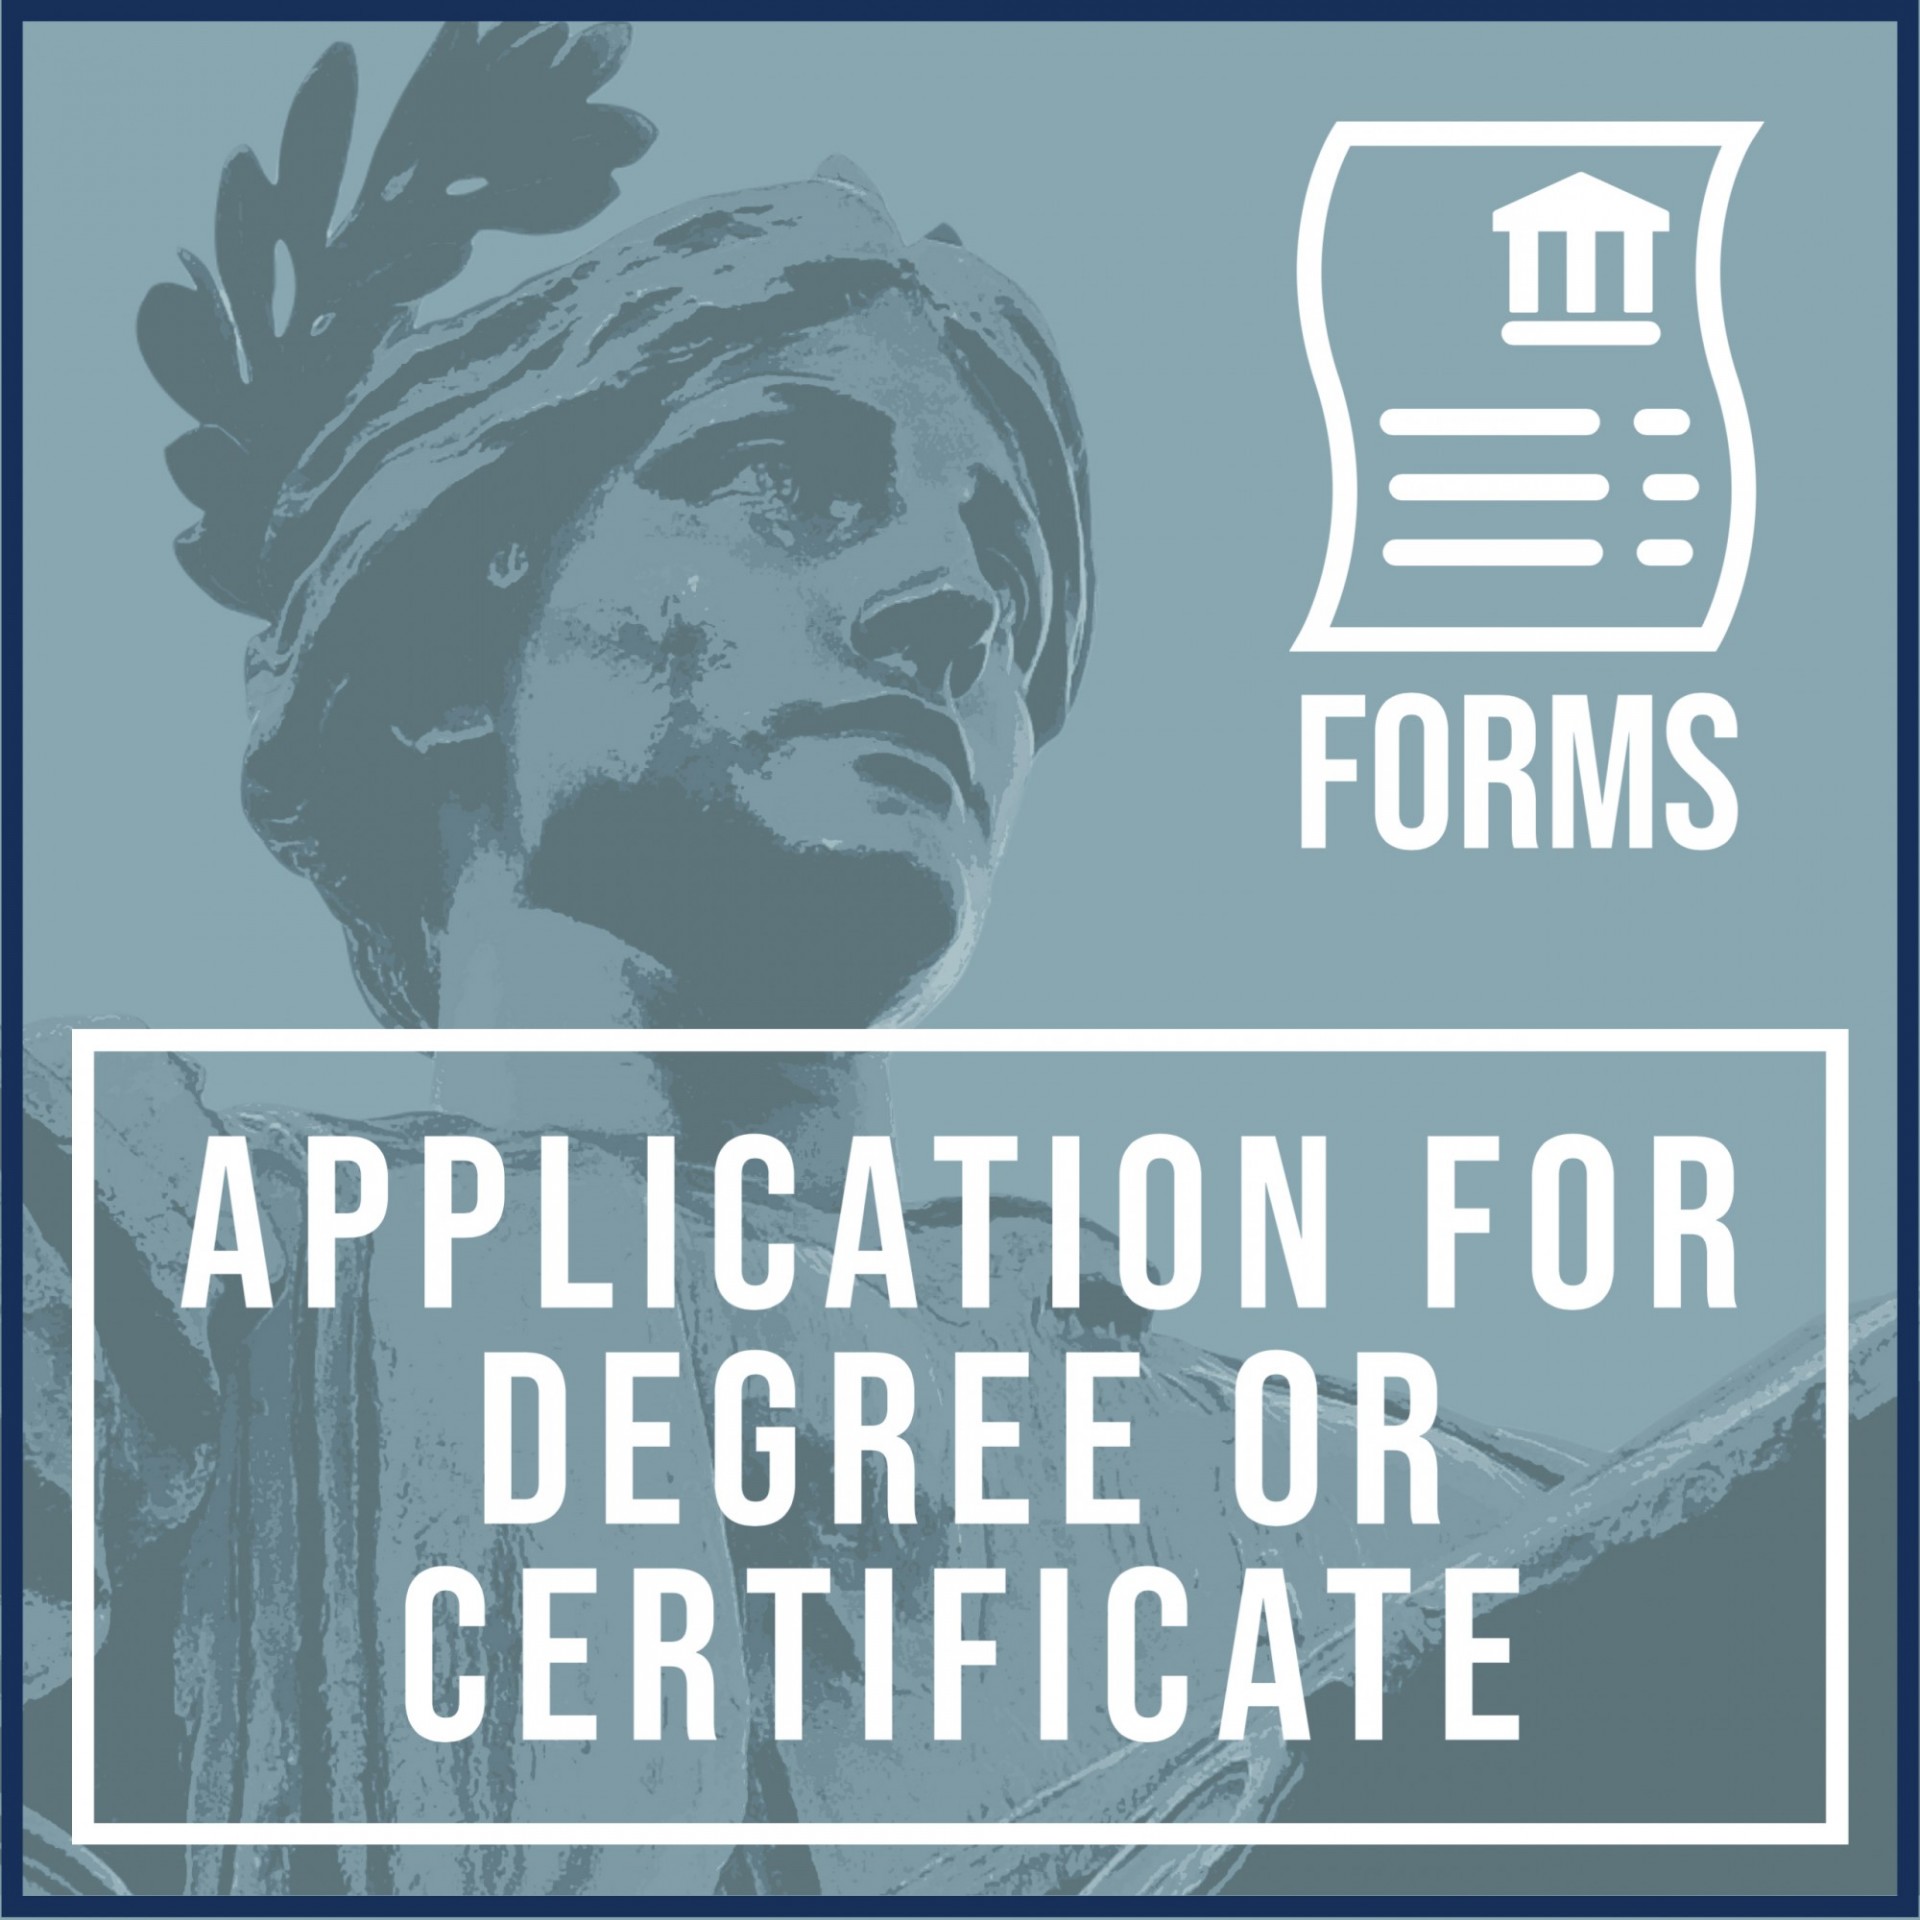 FORMS ICON: APPLICATION FOR DEGREE OR CERTIFICATE